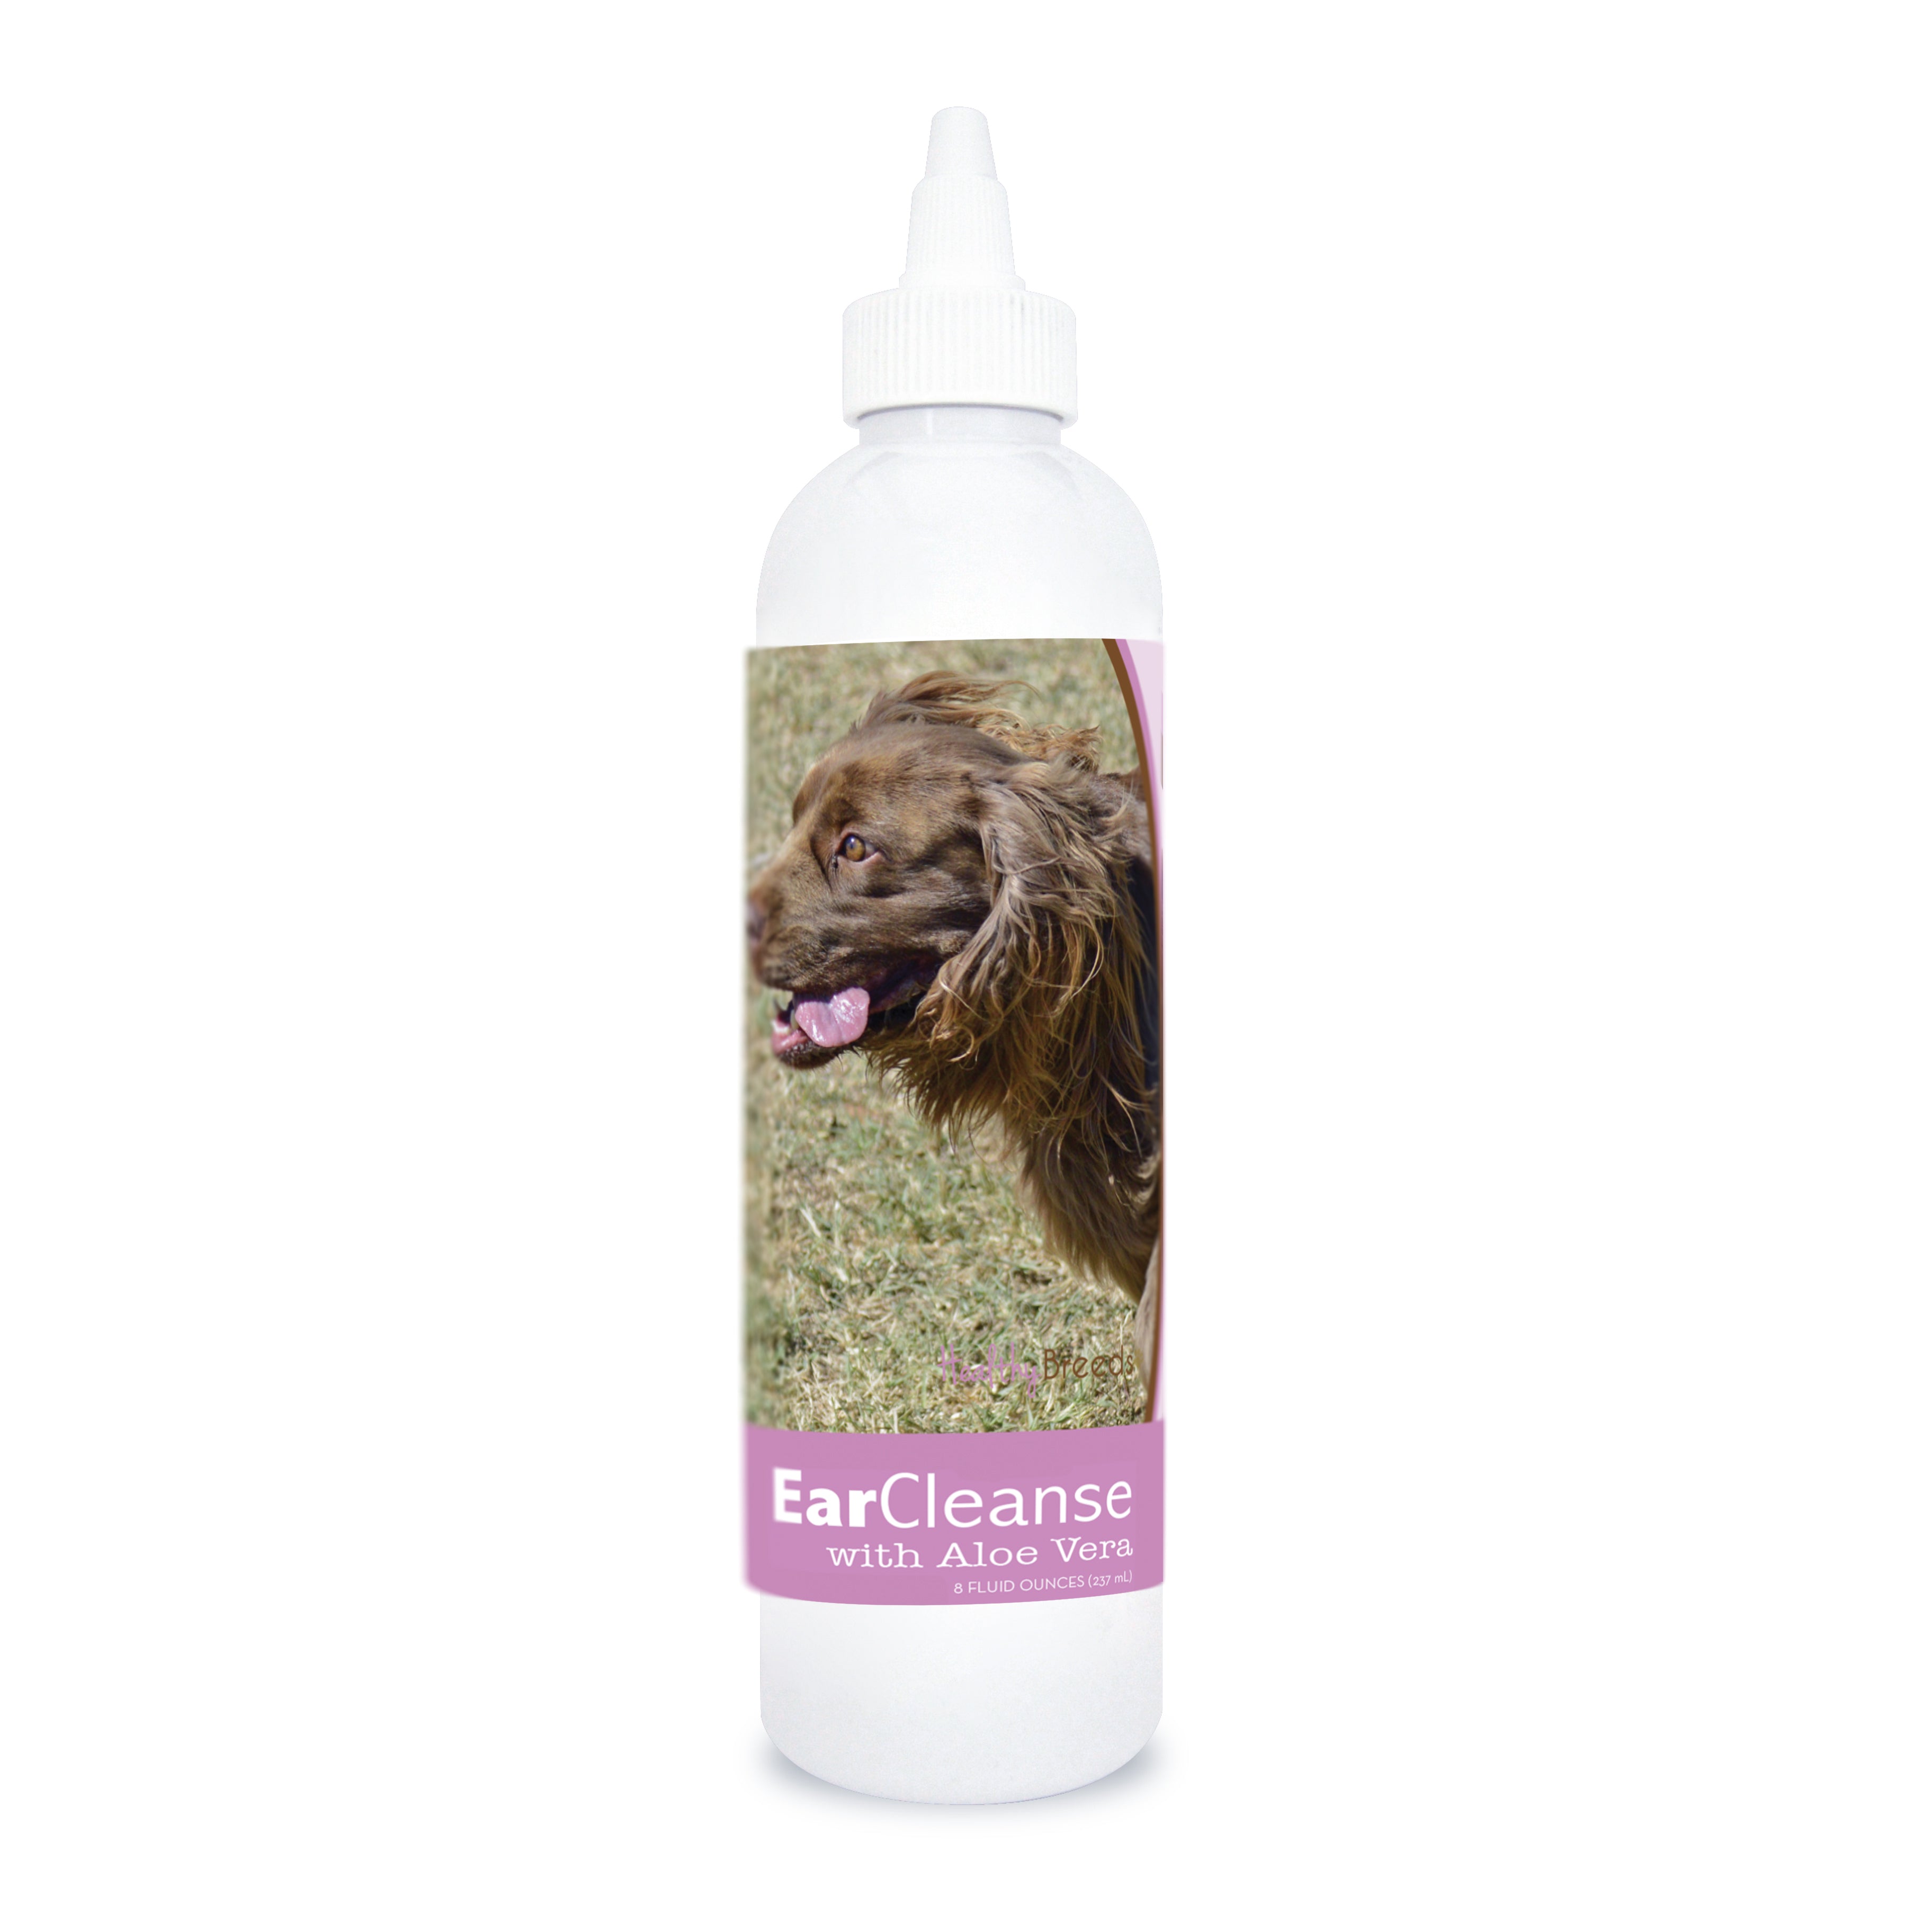 Sussex Spaniel Ear Cleanse with Aloe Vera Sweet Pea and Vanilla 8 oz